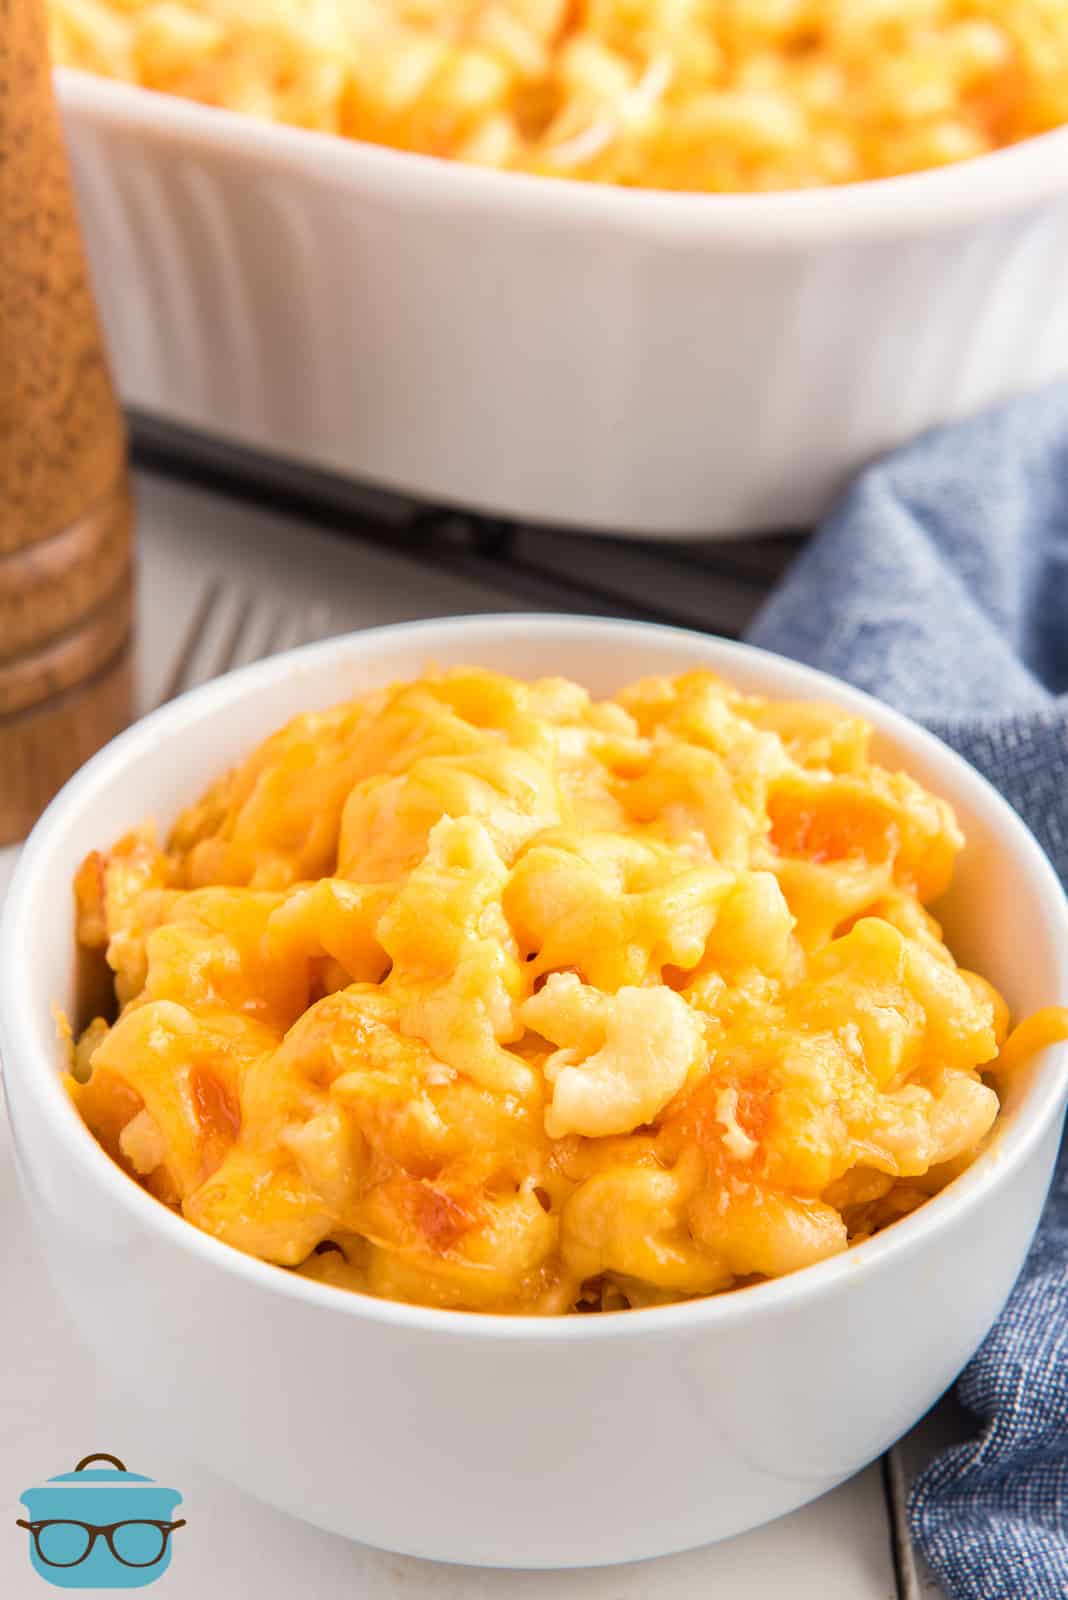 A small white bowl of macaroni and cheese in front of baking dish.